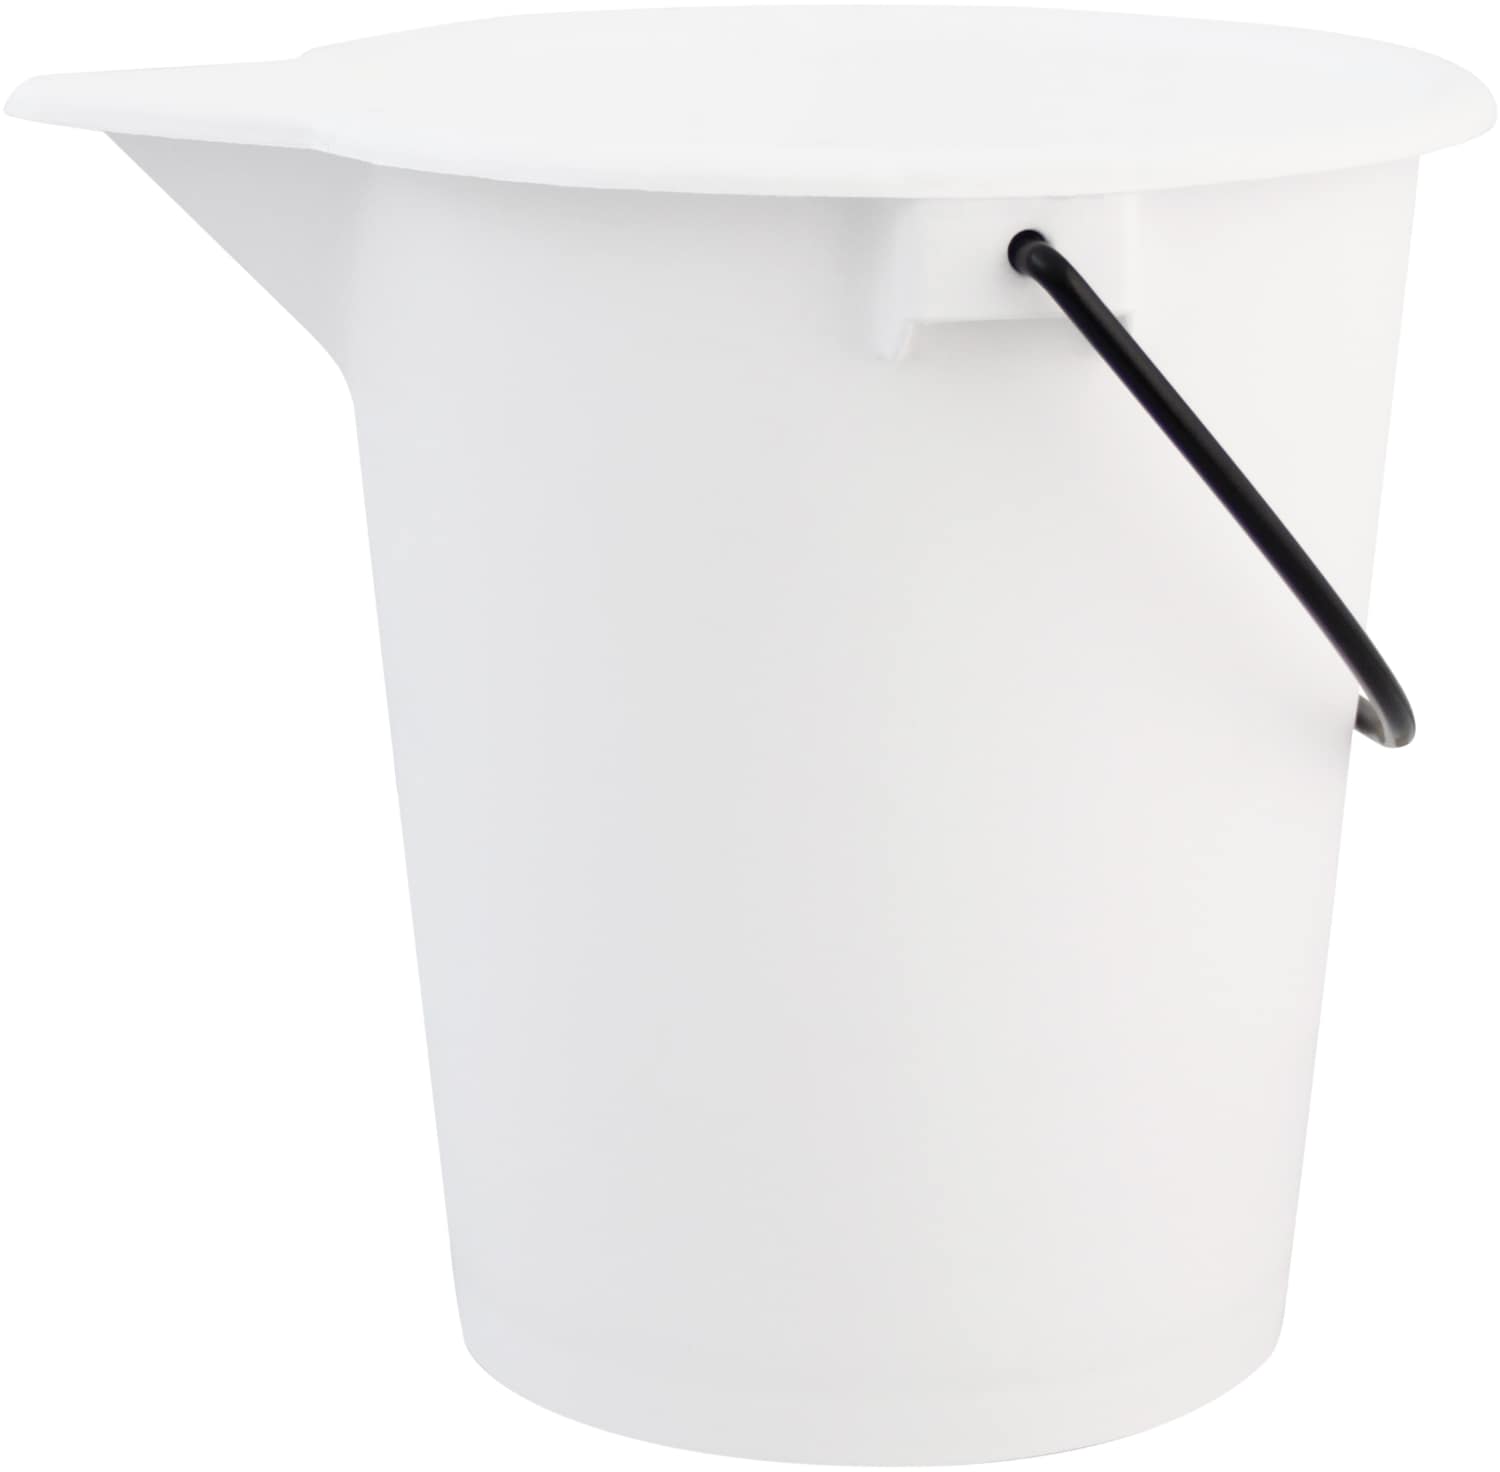 Bucket with spout and metal handle - heavy duty quality